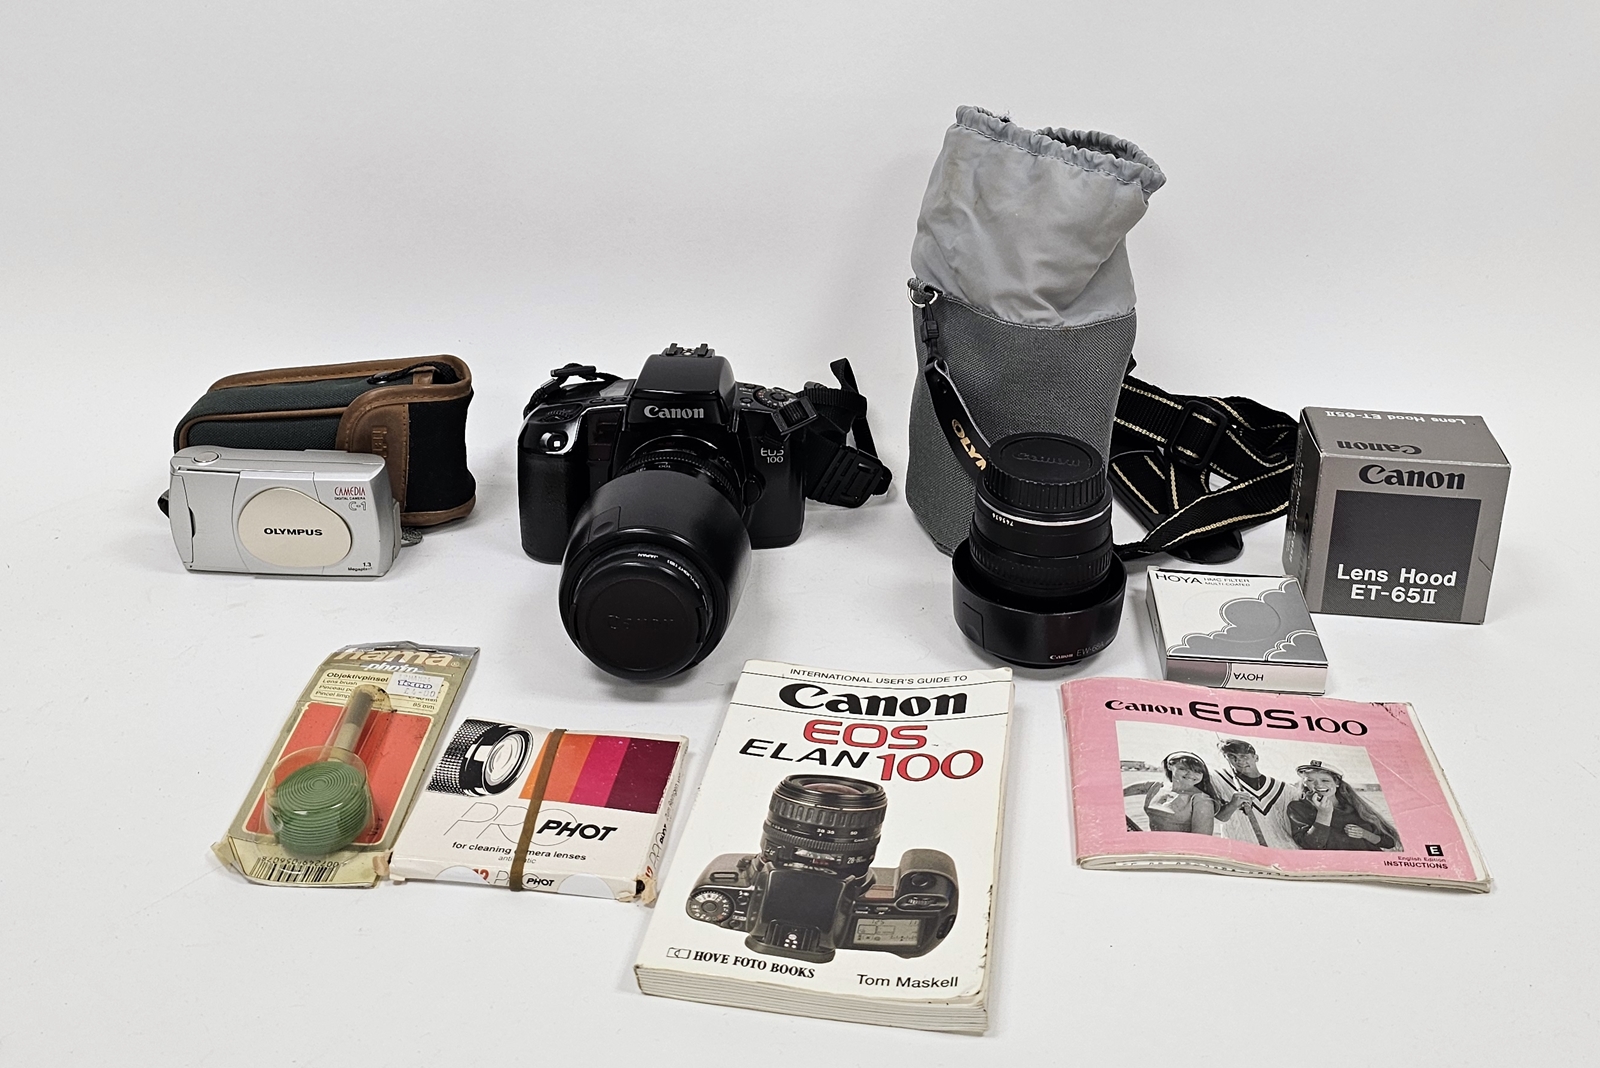 Canon EOS100 camera with Canon zoom lens and other camera equipment - Image 3 of 3